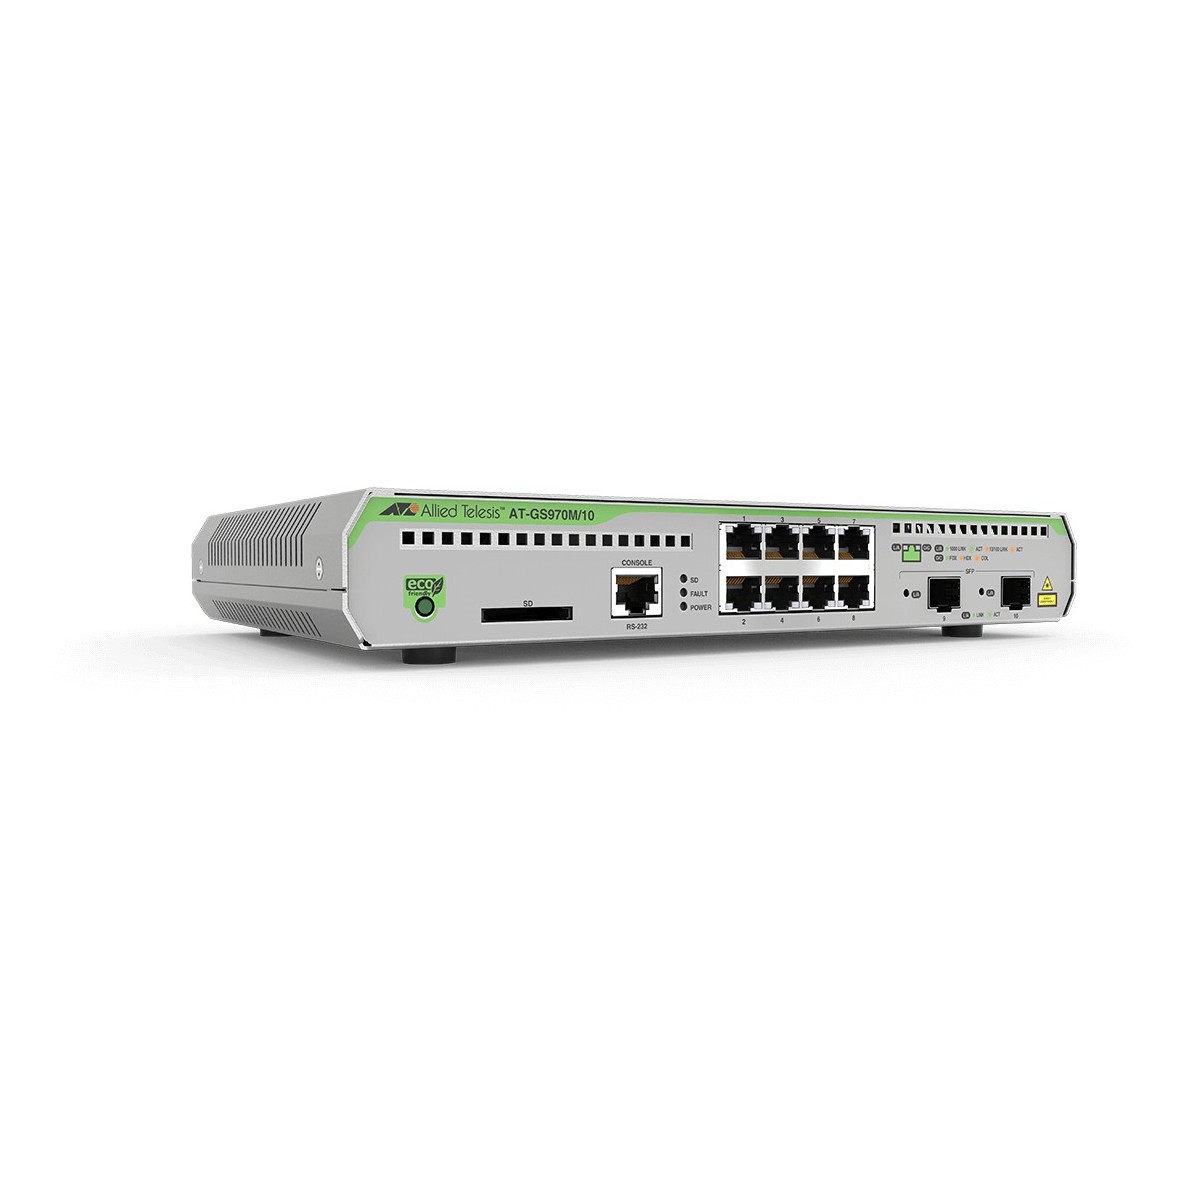 Allied Telesis AT-GS970M/10PS-50 - Managed - L3 - Gigabit Ethernet (10/100/1000) - Power over Ethernet (PoE) - Rack mounting - 1